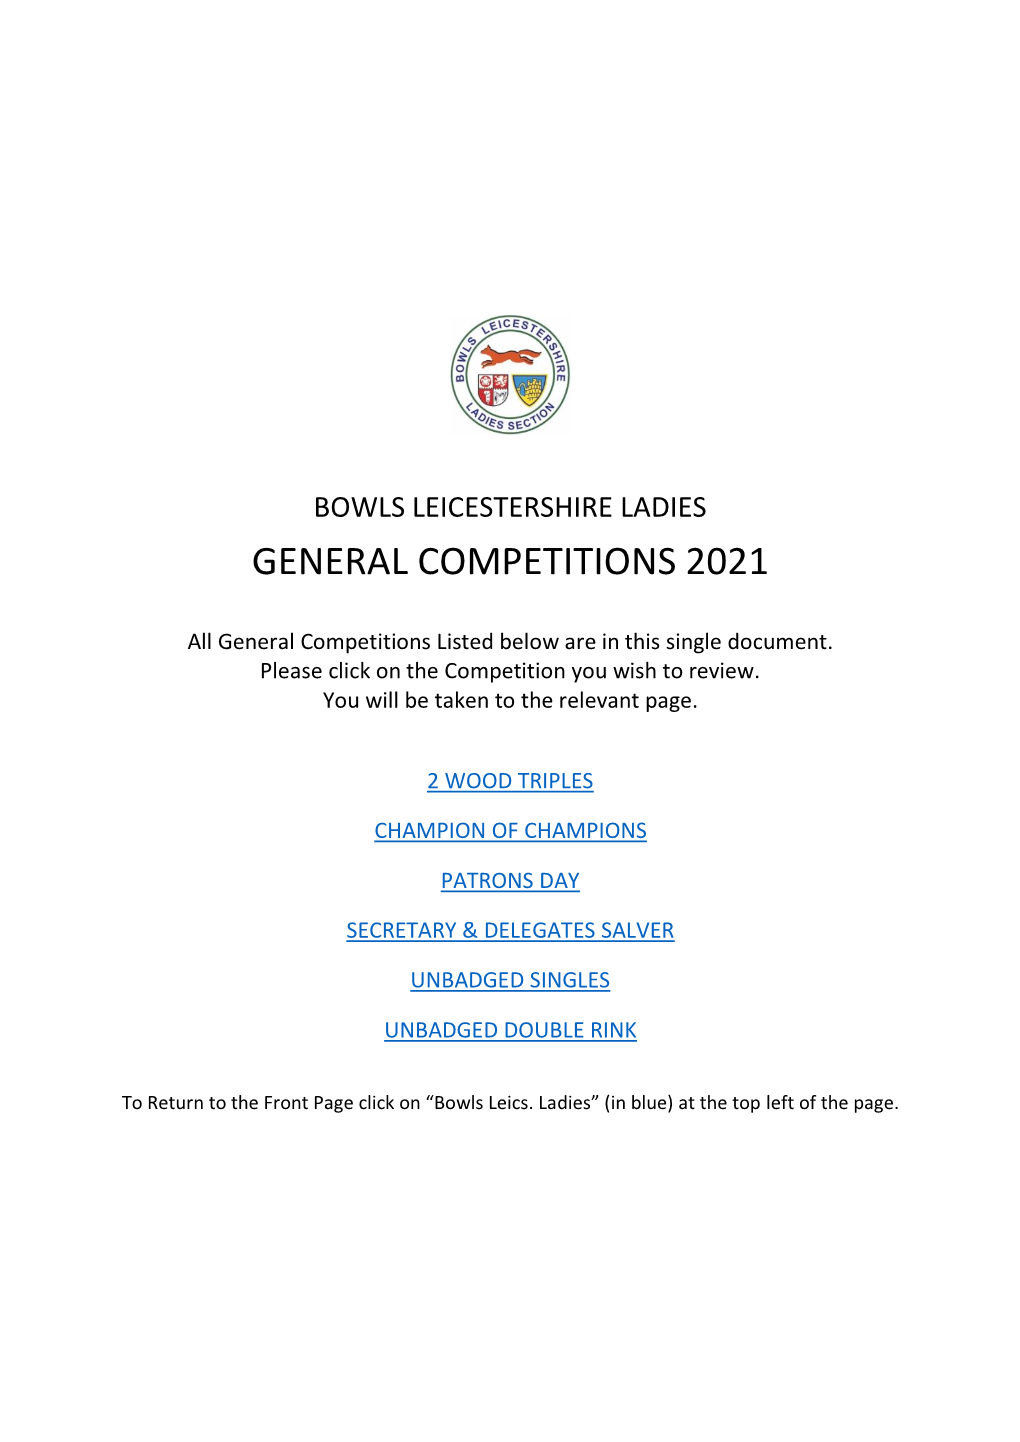 Bowls Leicestershire Ladies General Competitions 2021